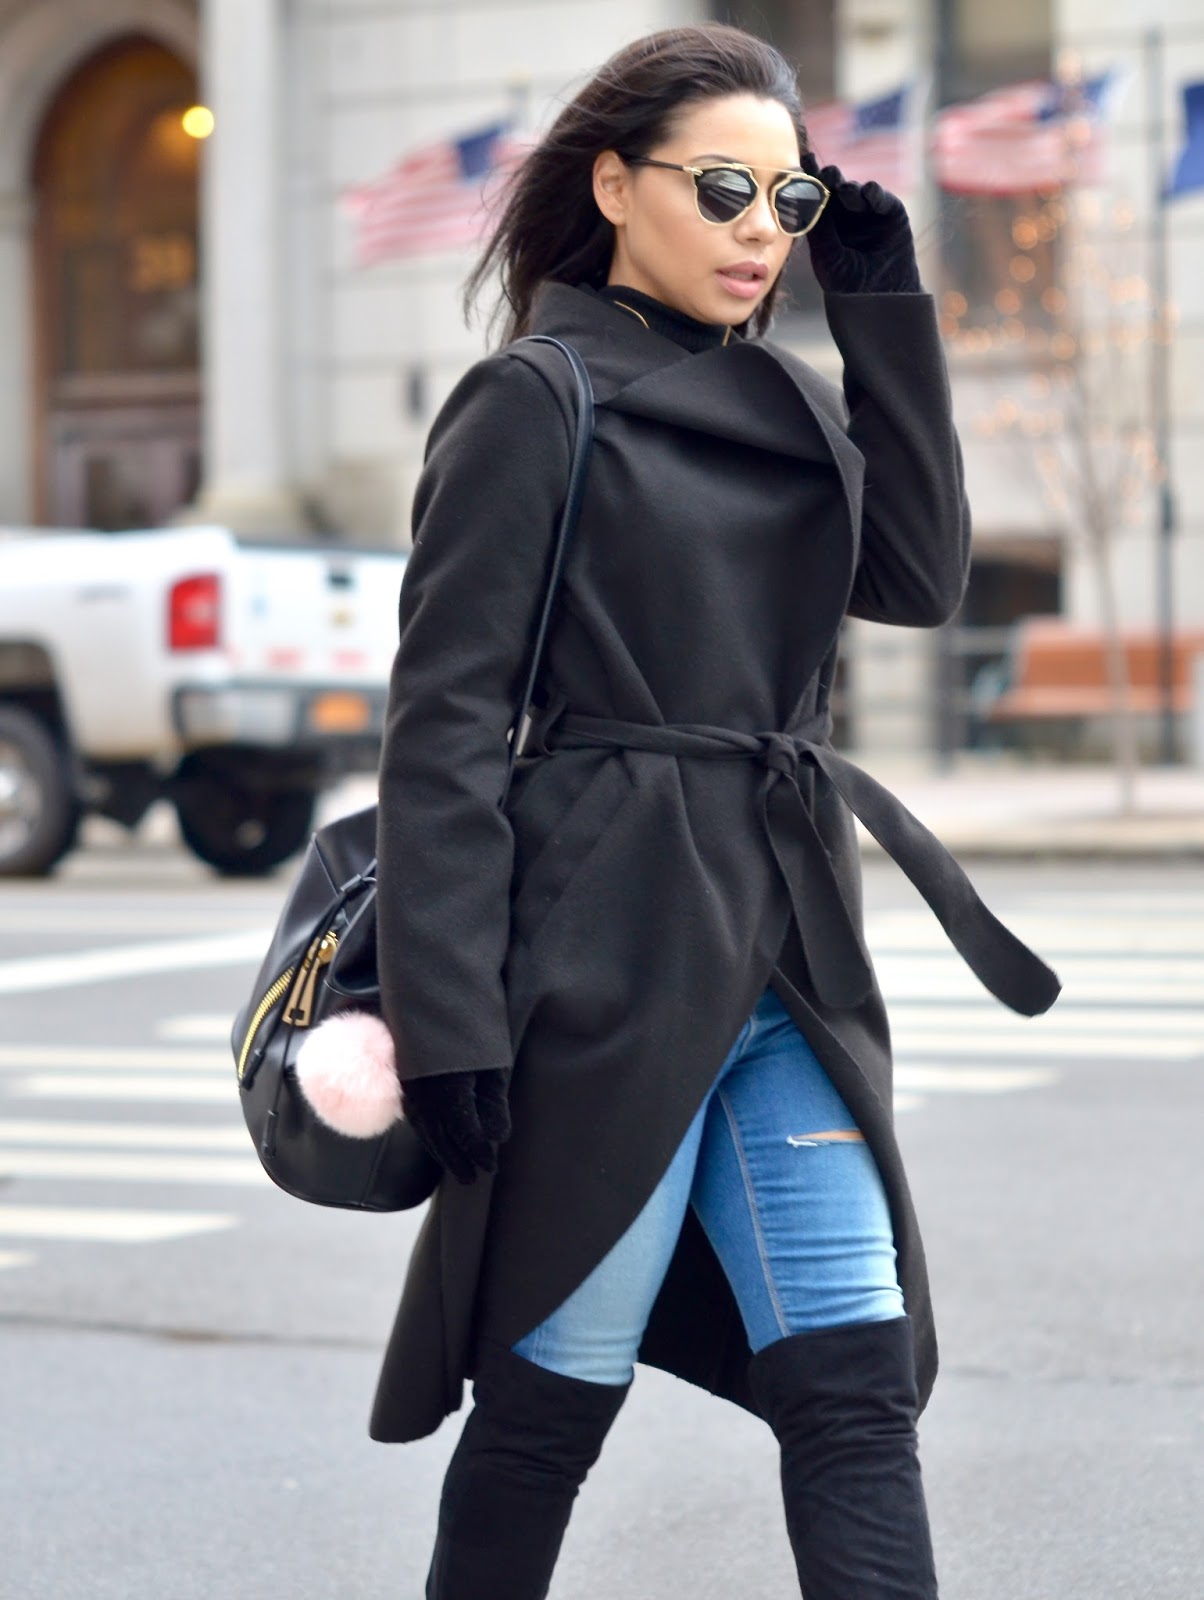 Classic All Black Winter Style: Waterfall Wrap Coat | The Style Brunch